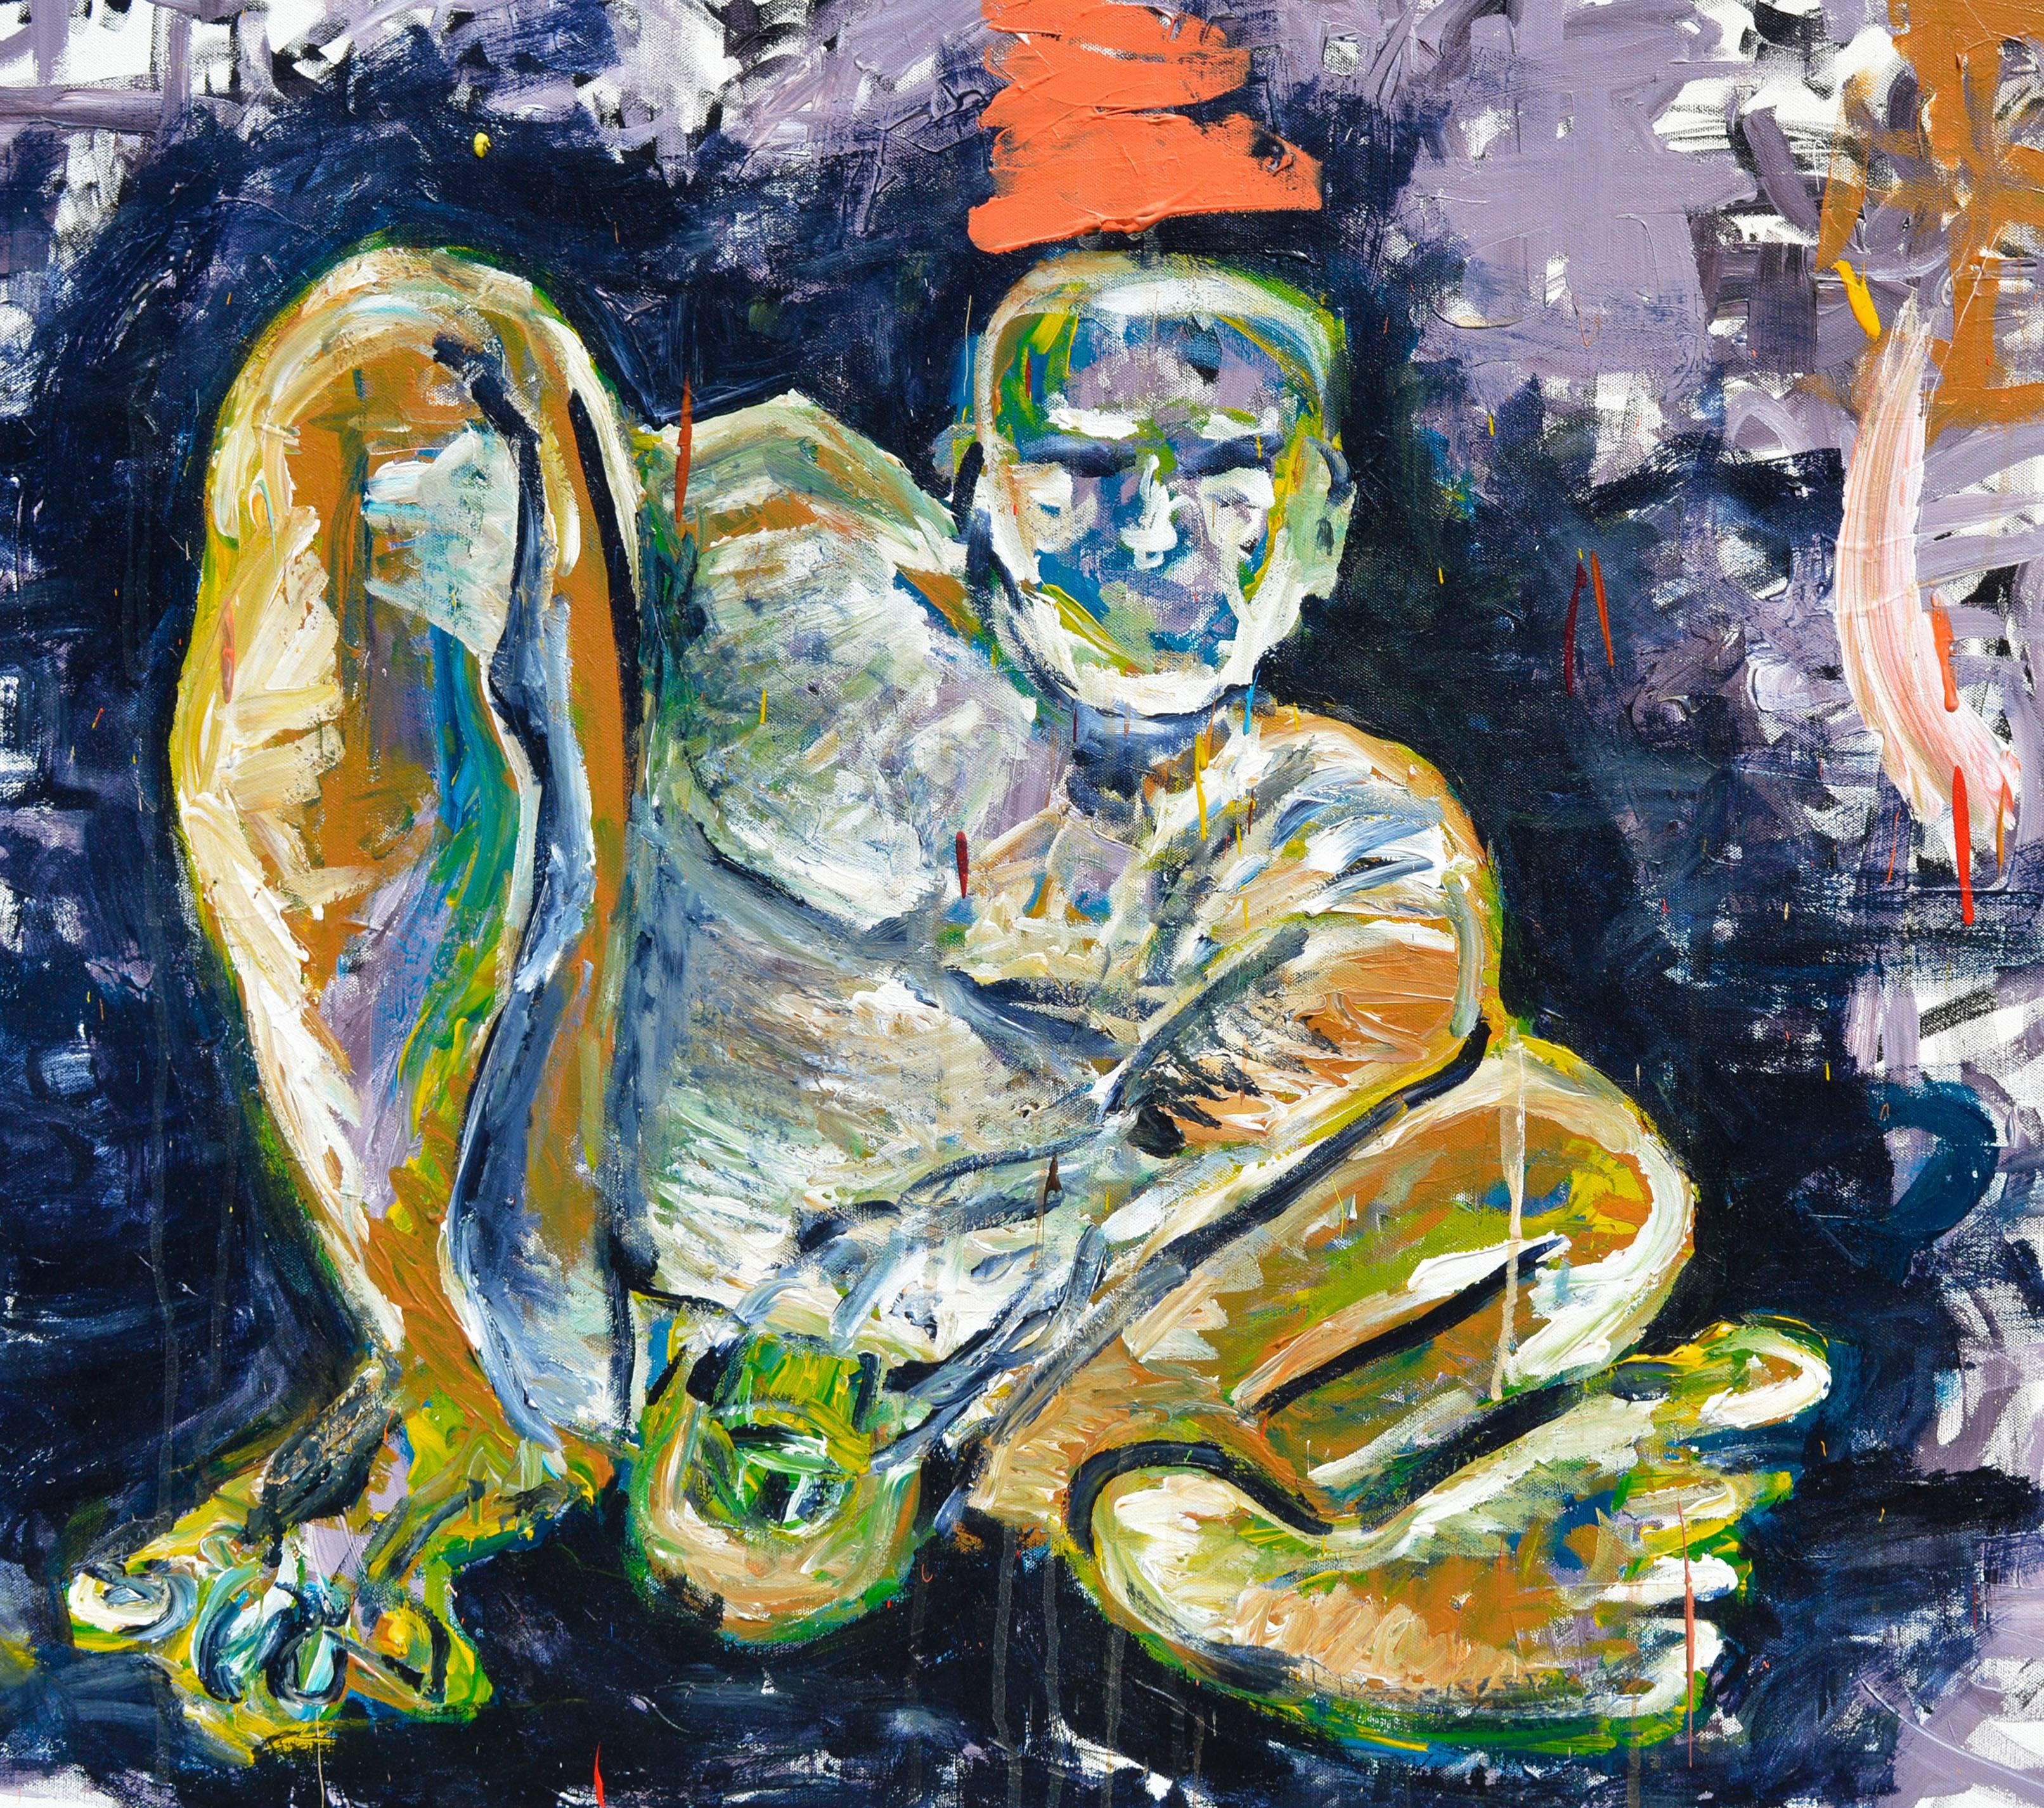 Abstract Expressionist Seated Figure with Clown Hat - Painting by Daniel David Fuentes